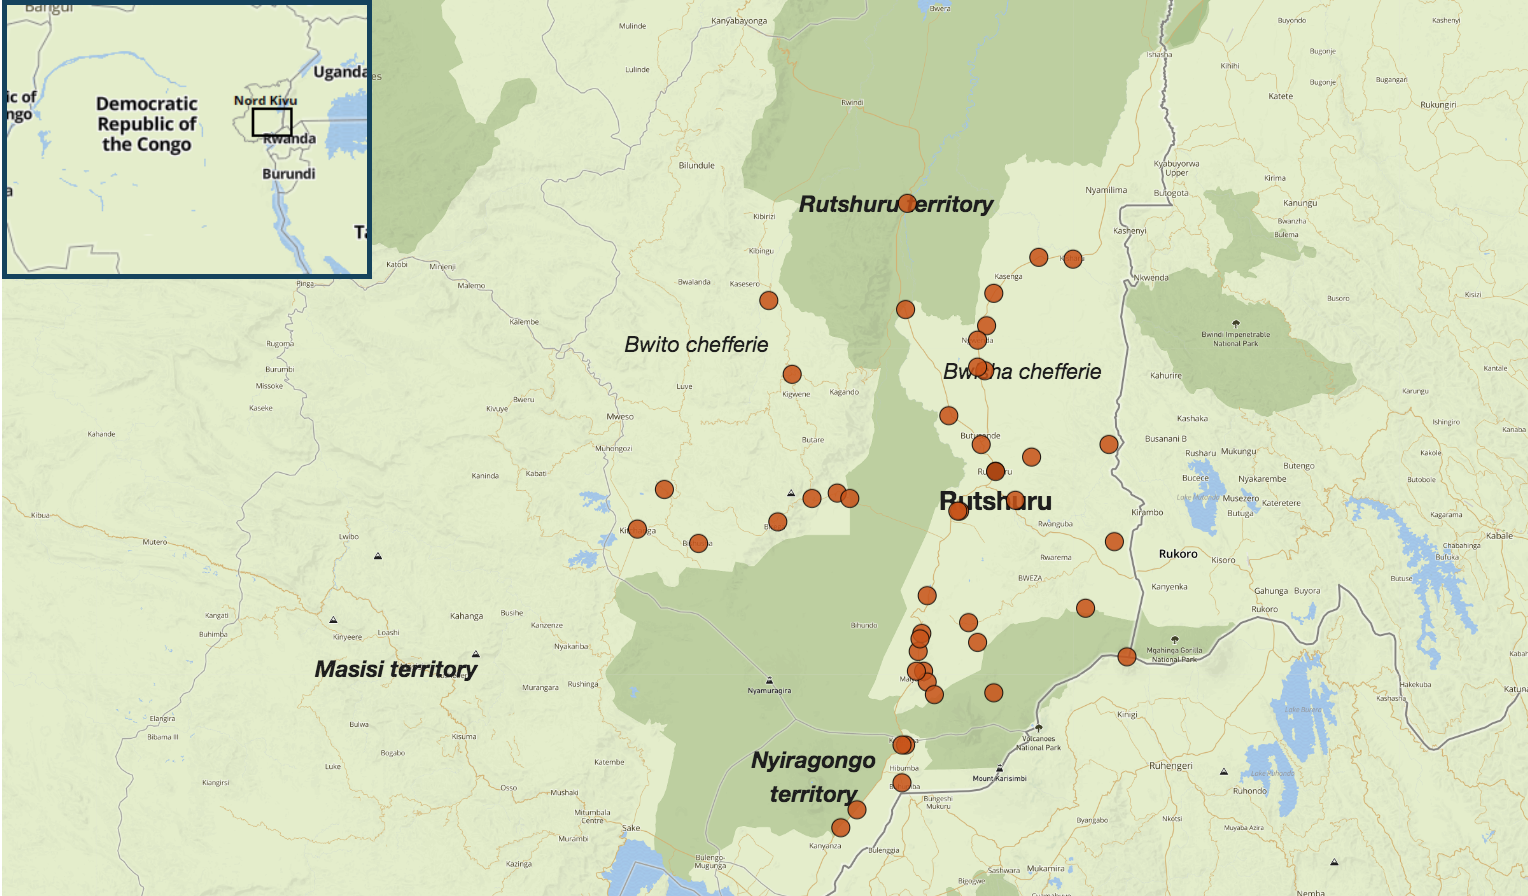 Analysis of ACLED data on the M23 rebel group's activities in the Democratic Republic of Congo.